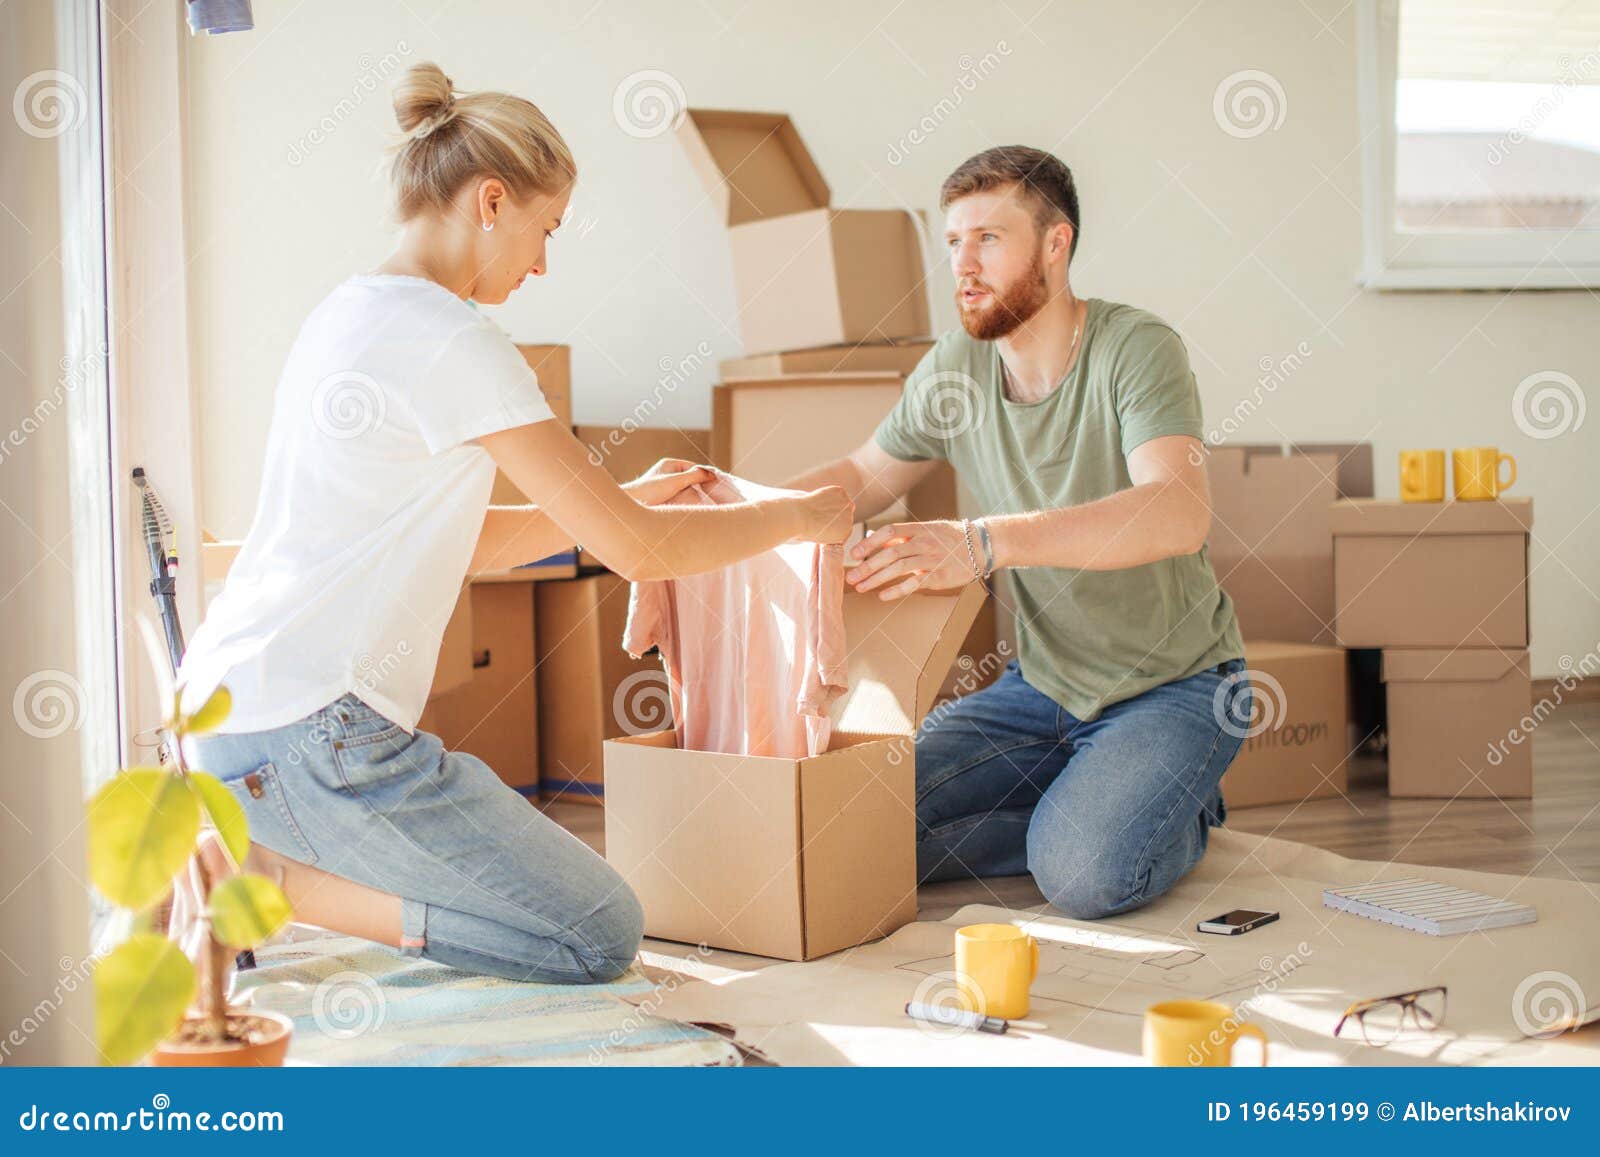 https://thumbs.dreamstime.com/z/young-couple-new-apartment-unpacking-cardboard-boxes-196459199.jpg